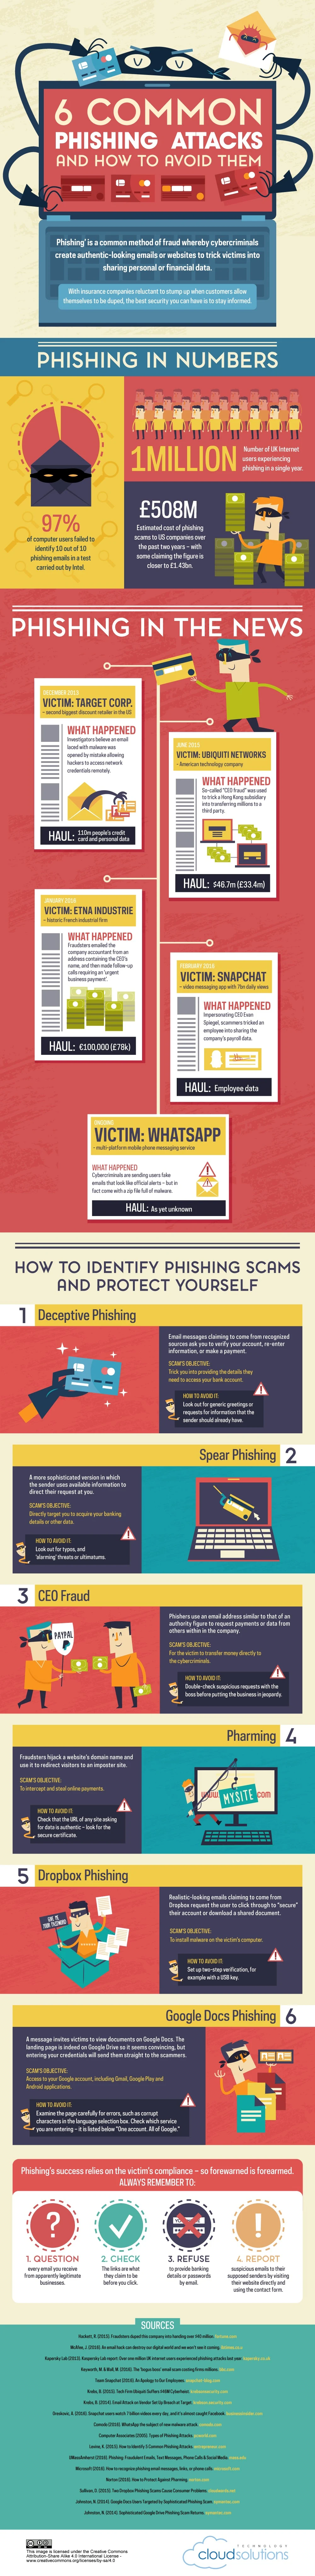 6 Most Common Phishing Attacks and How to Avoid Them [infographic]